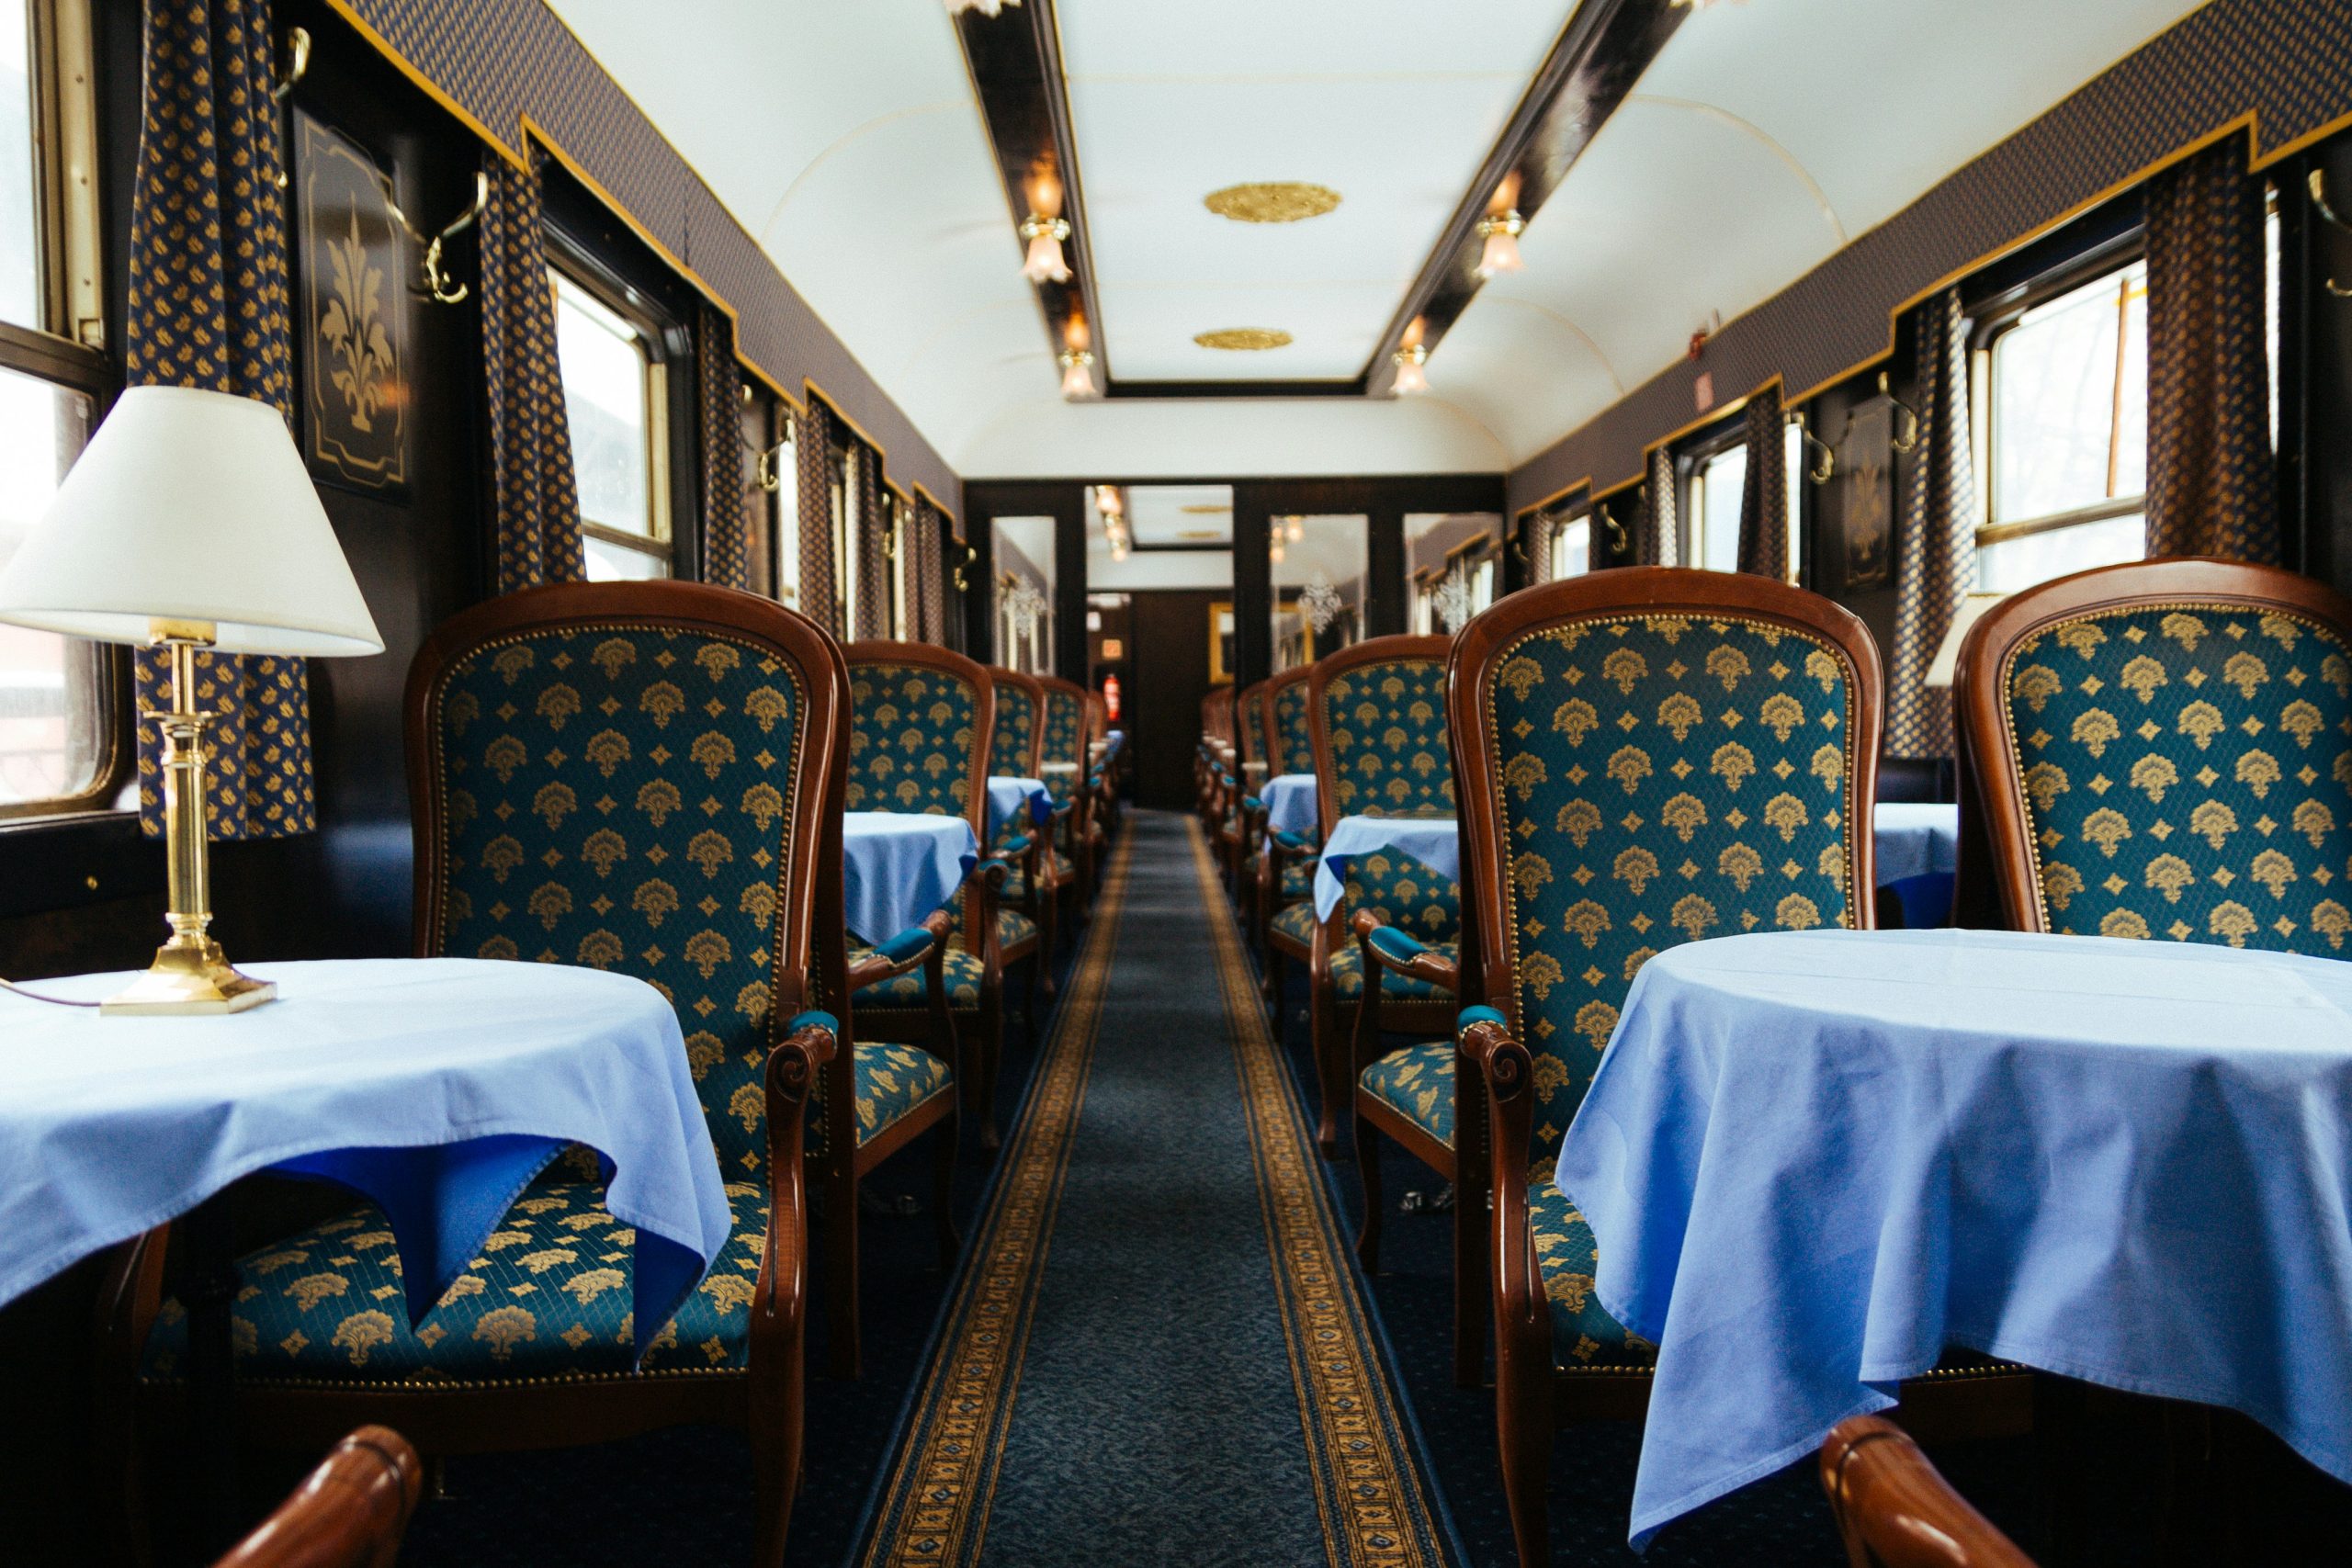 explore the world in opulence and style with our luxury train journeys. book now for an unforgettable experience.